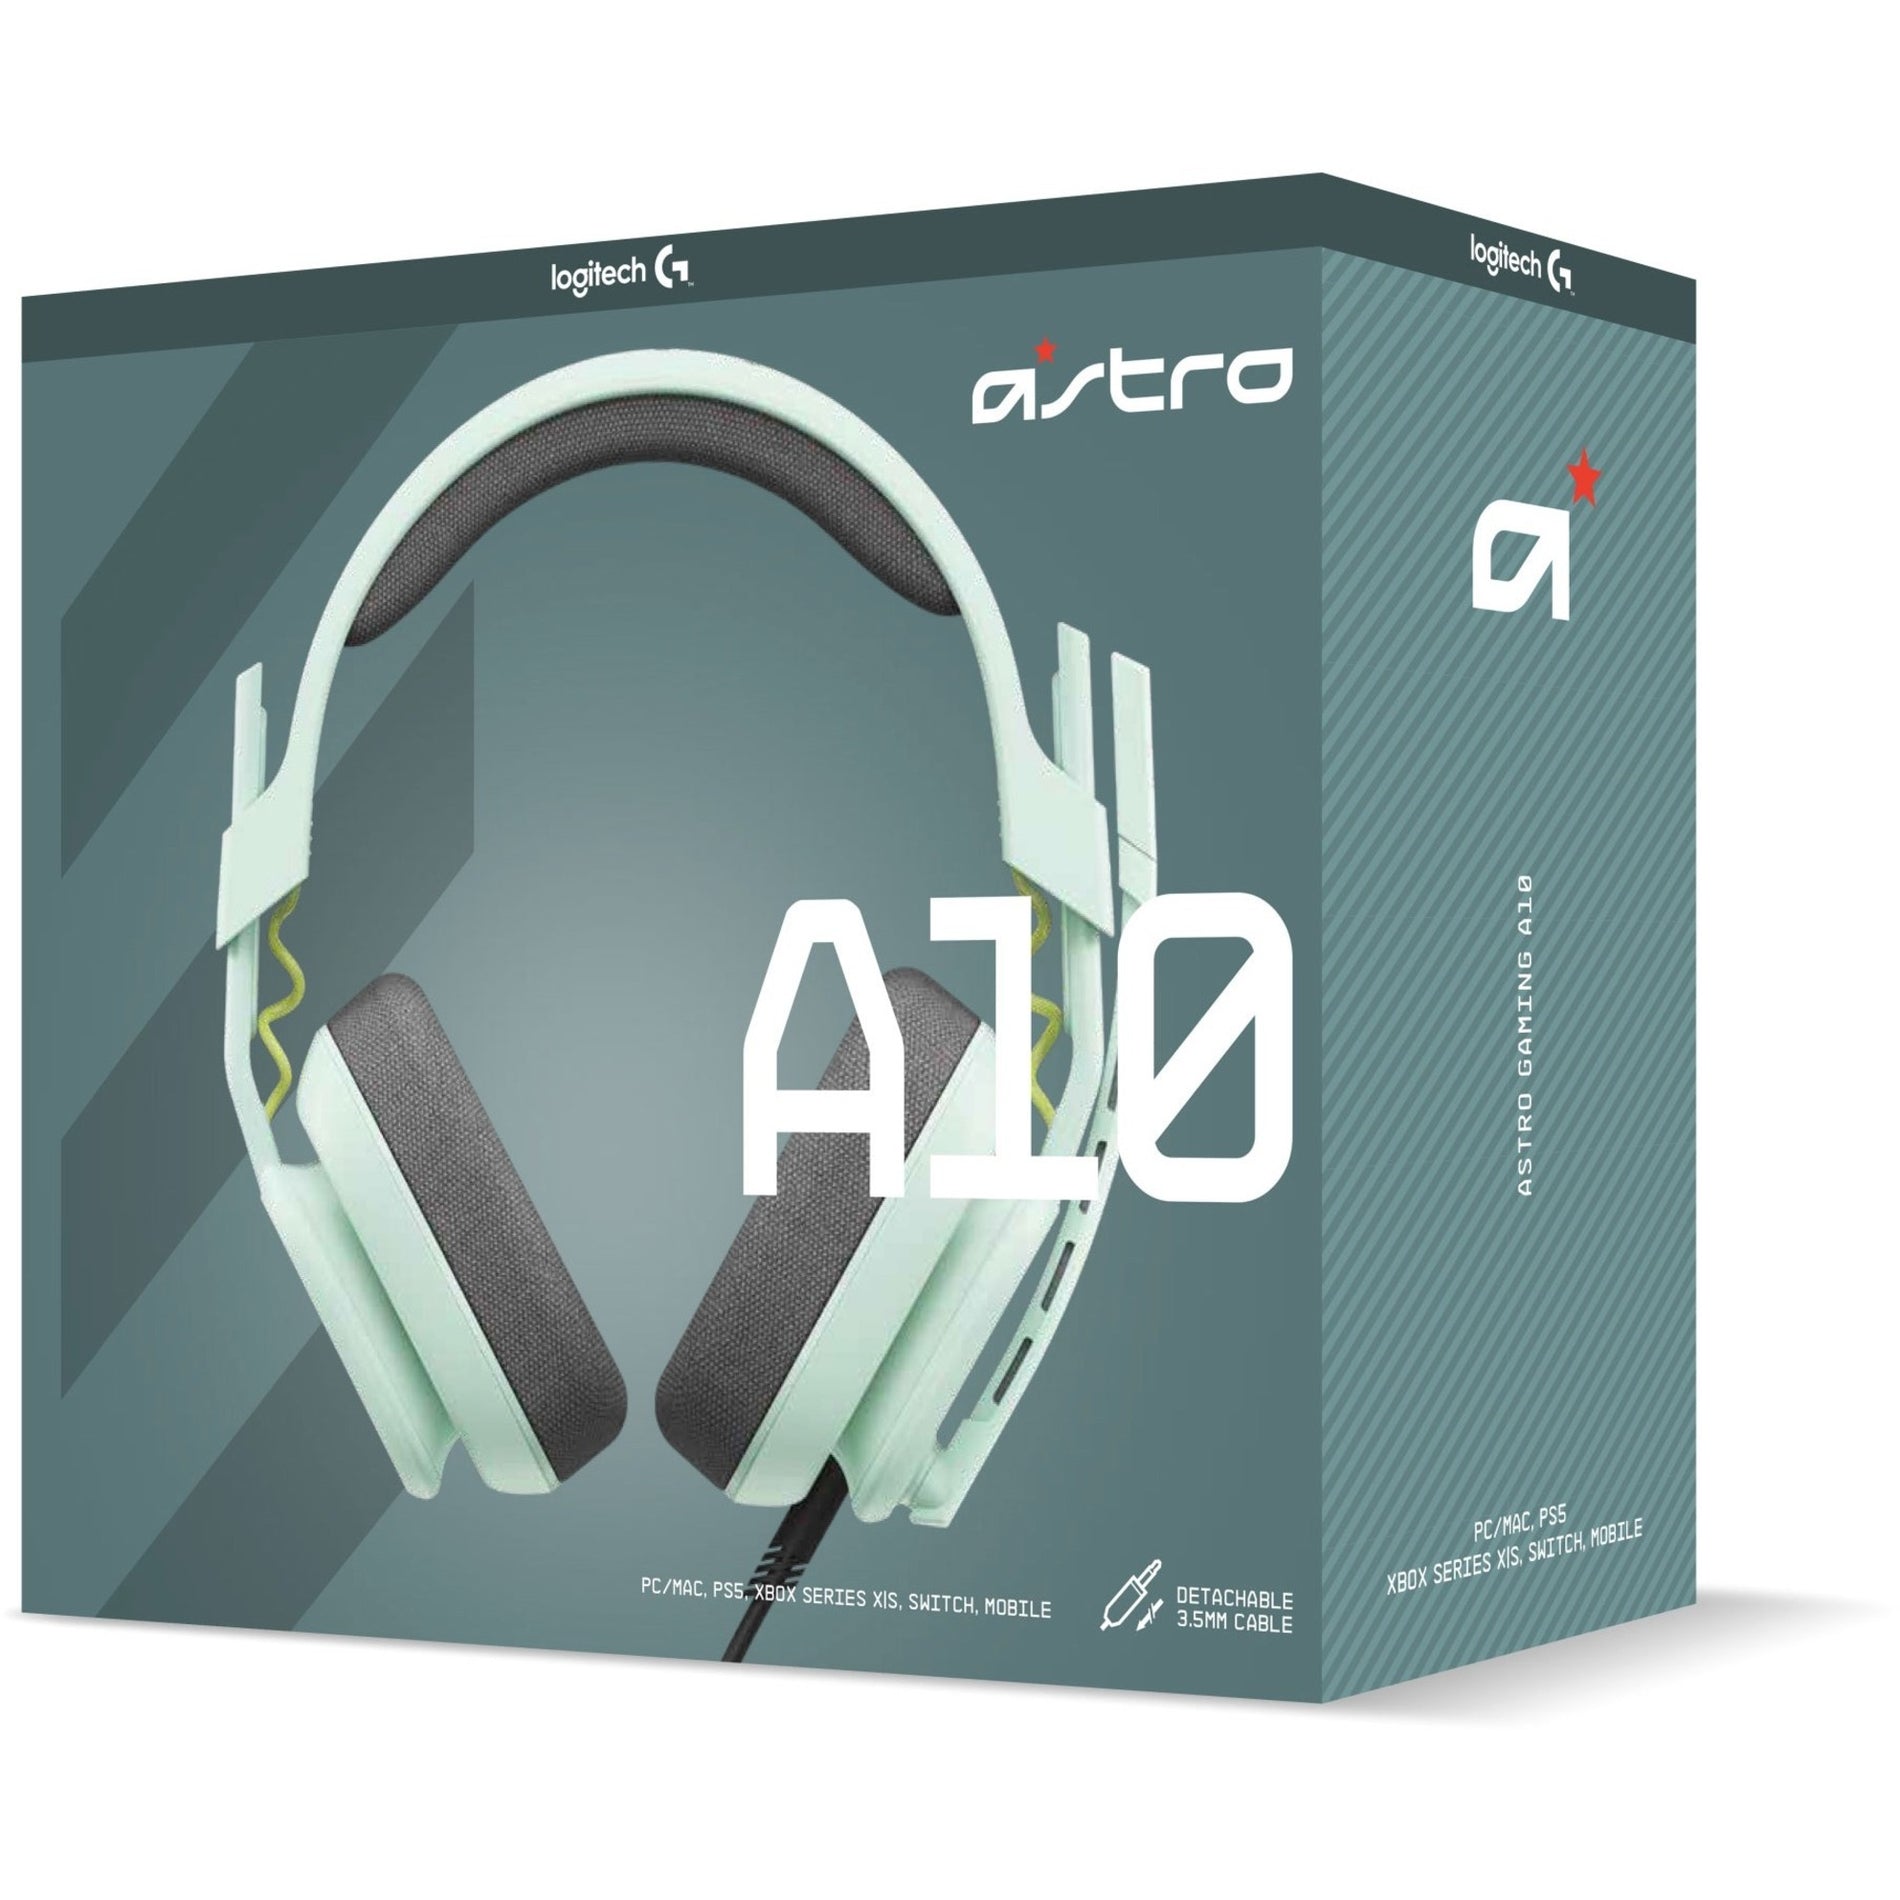 Astro 939-002083 A10 Headset, Over-the-ear Gaming Headset with Uni-directional Microphone, Mint Color